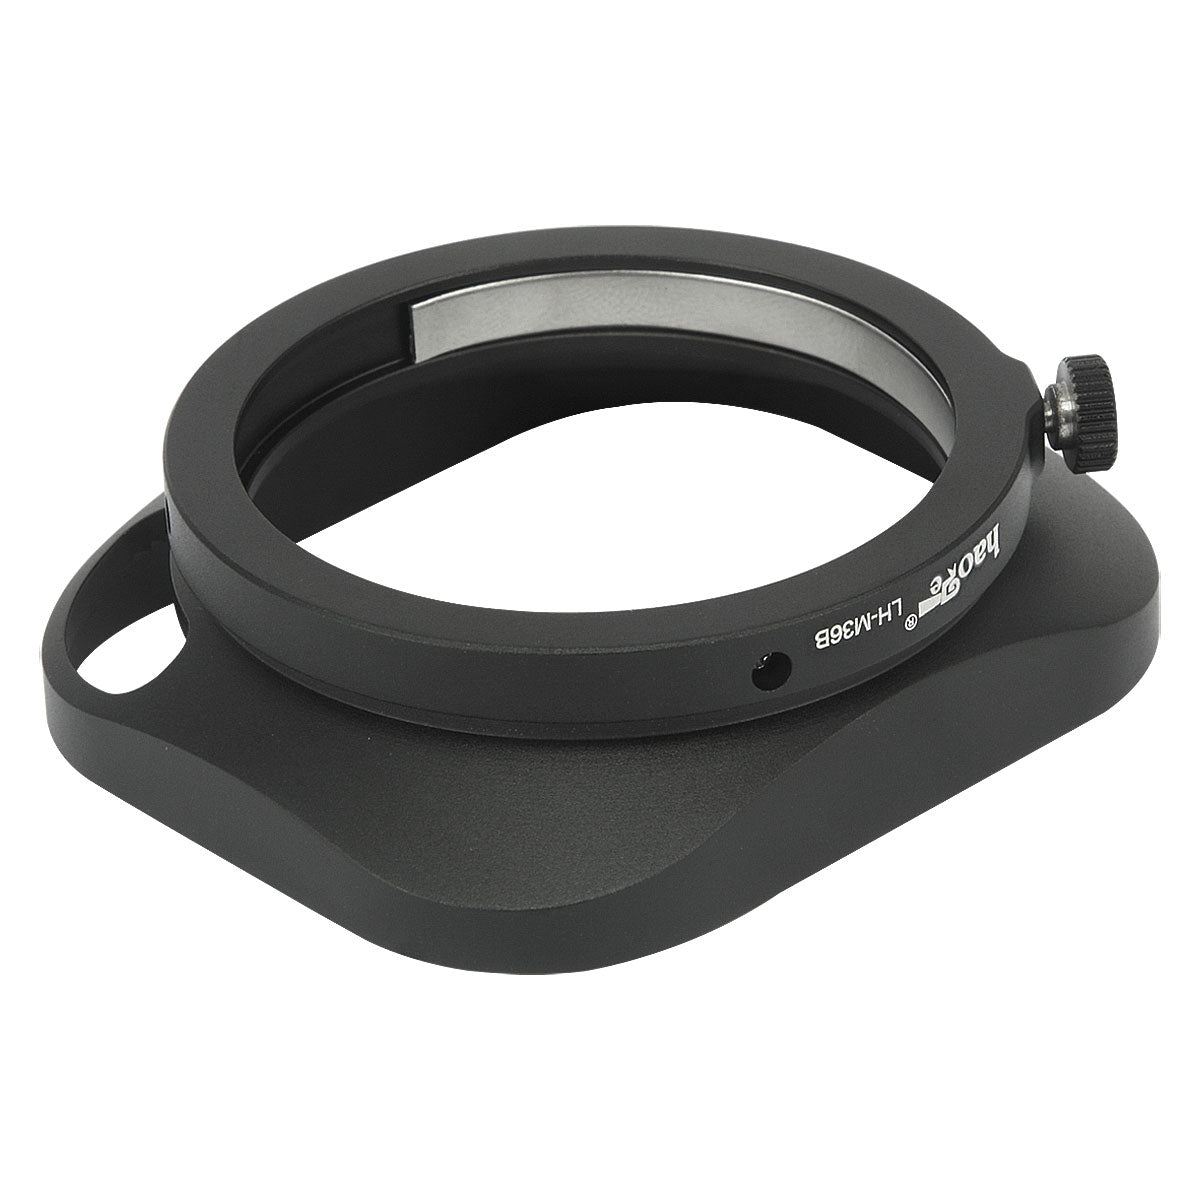 Haoge LH-M36B Square Metal Lens Hood Hollow Out Designed with Cap for Leica Summicron 35mm f2, Summicron M 35mm f2, Summicron-M 35mm f2 ASPH and Elmarit-M 28mm f2.8 ASPH Lens Black